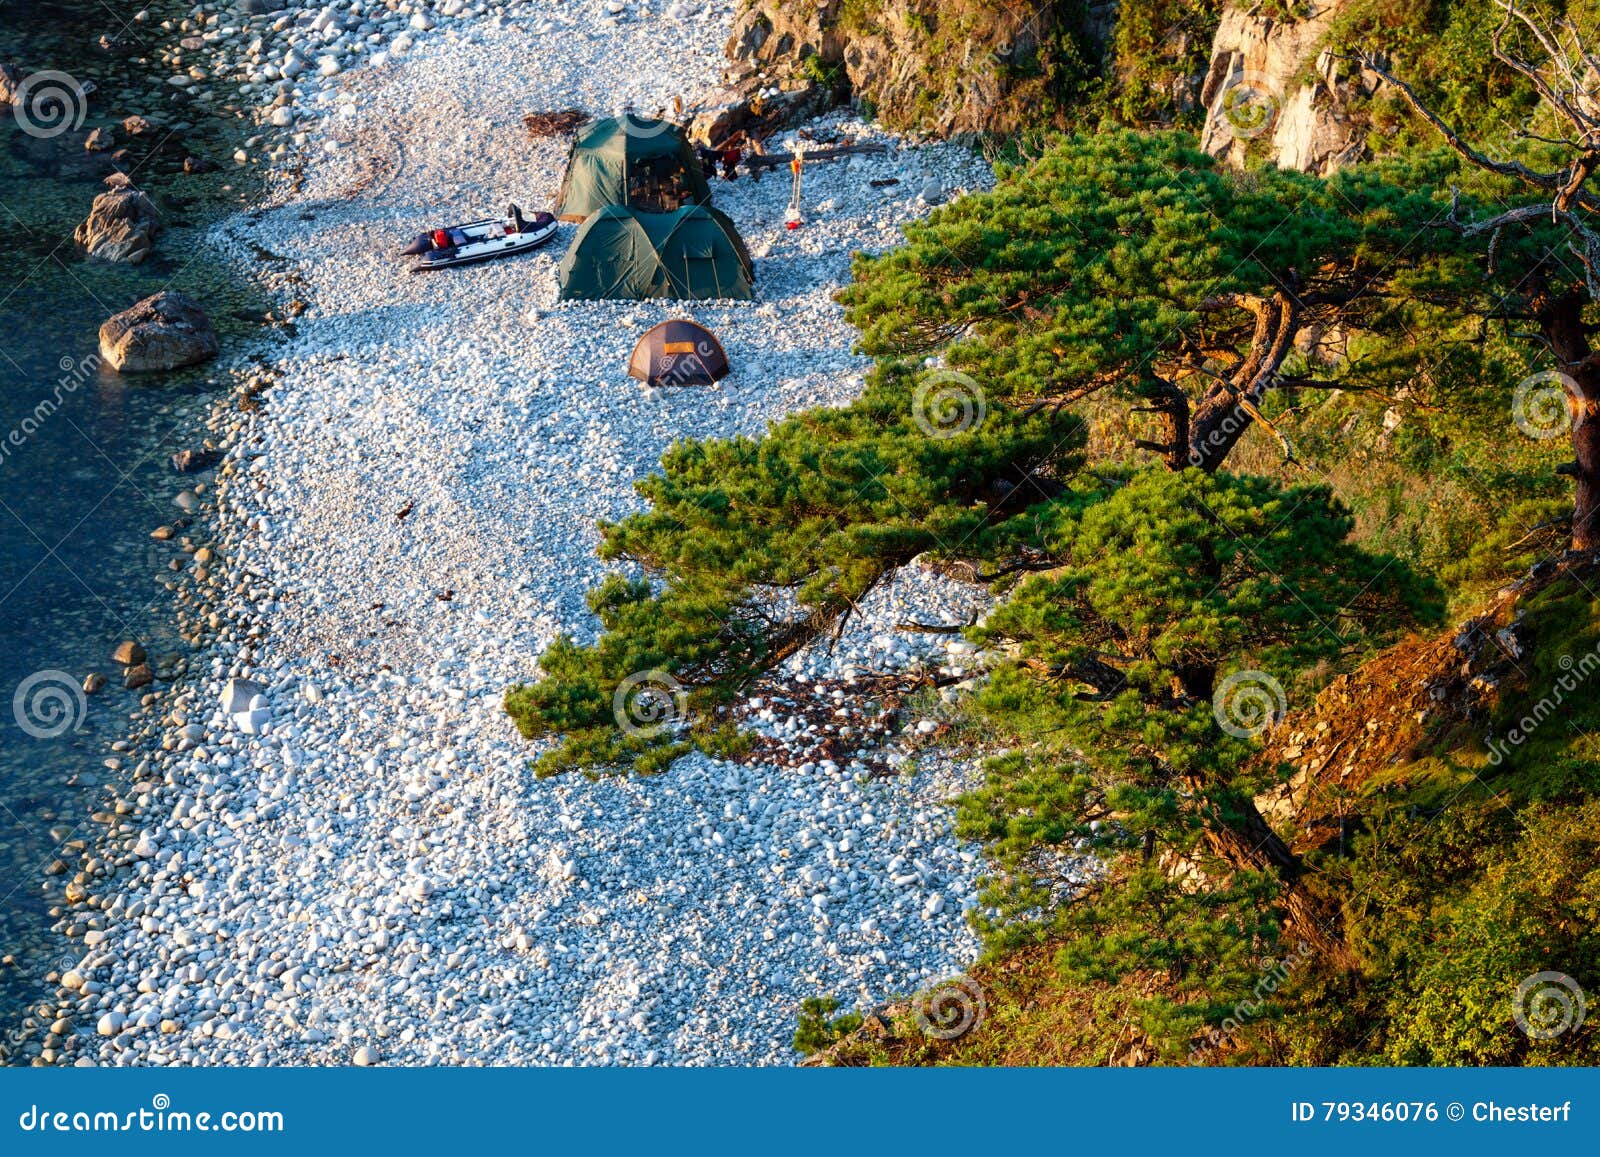 Camping with many tents on the beach at the seaside, view from hill, focus on the pine